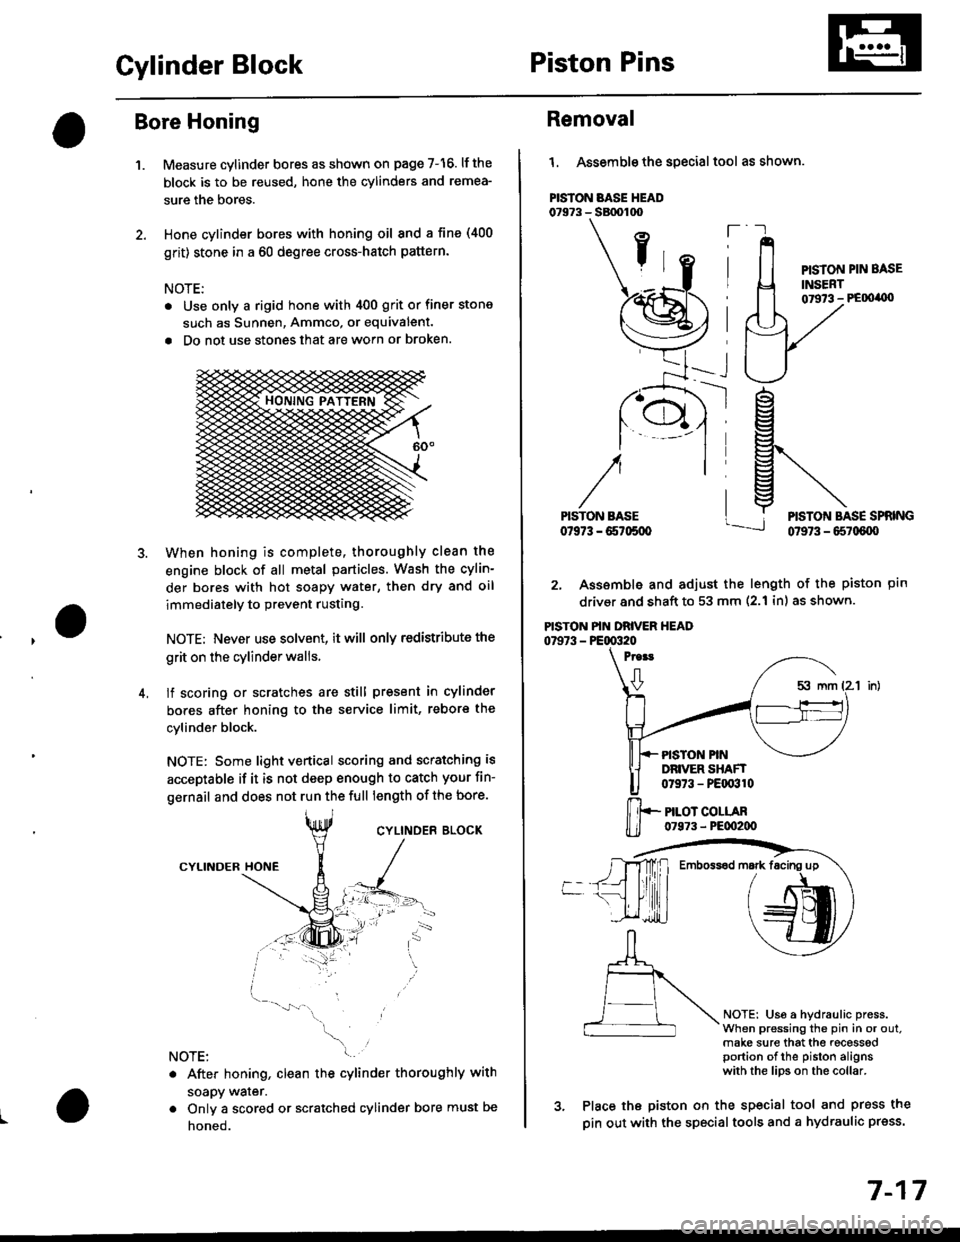 HONDA CIVIC 2000 6.G Workshop Manual Cylinder BlockPiston Pins
Bore Honing
1.Measure cylinder bores as shown on page 7-16. lf the
block is to be reused, hone the cylinders and remea-
sure the bores.
Hone cylinder bores with honing oil 8n